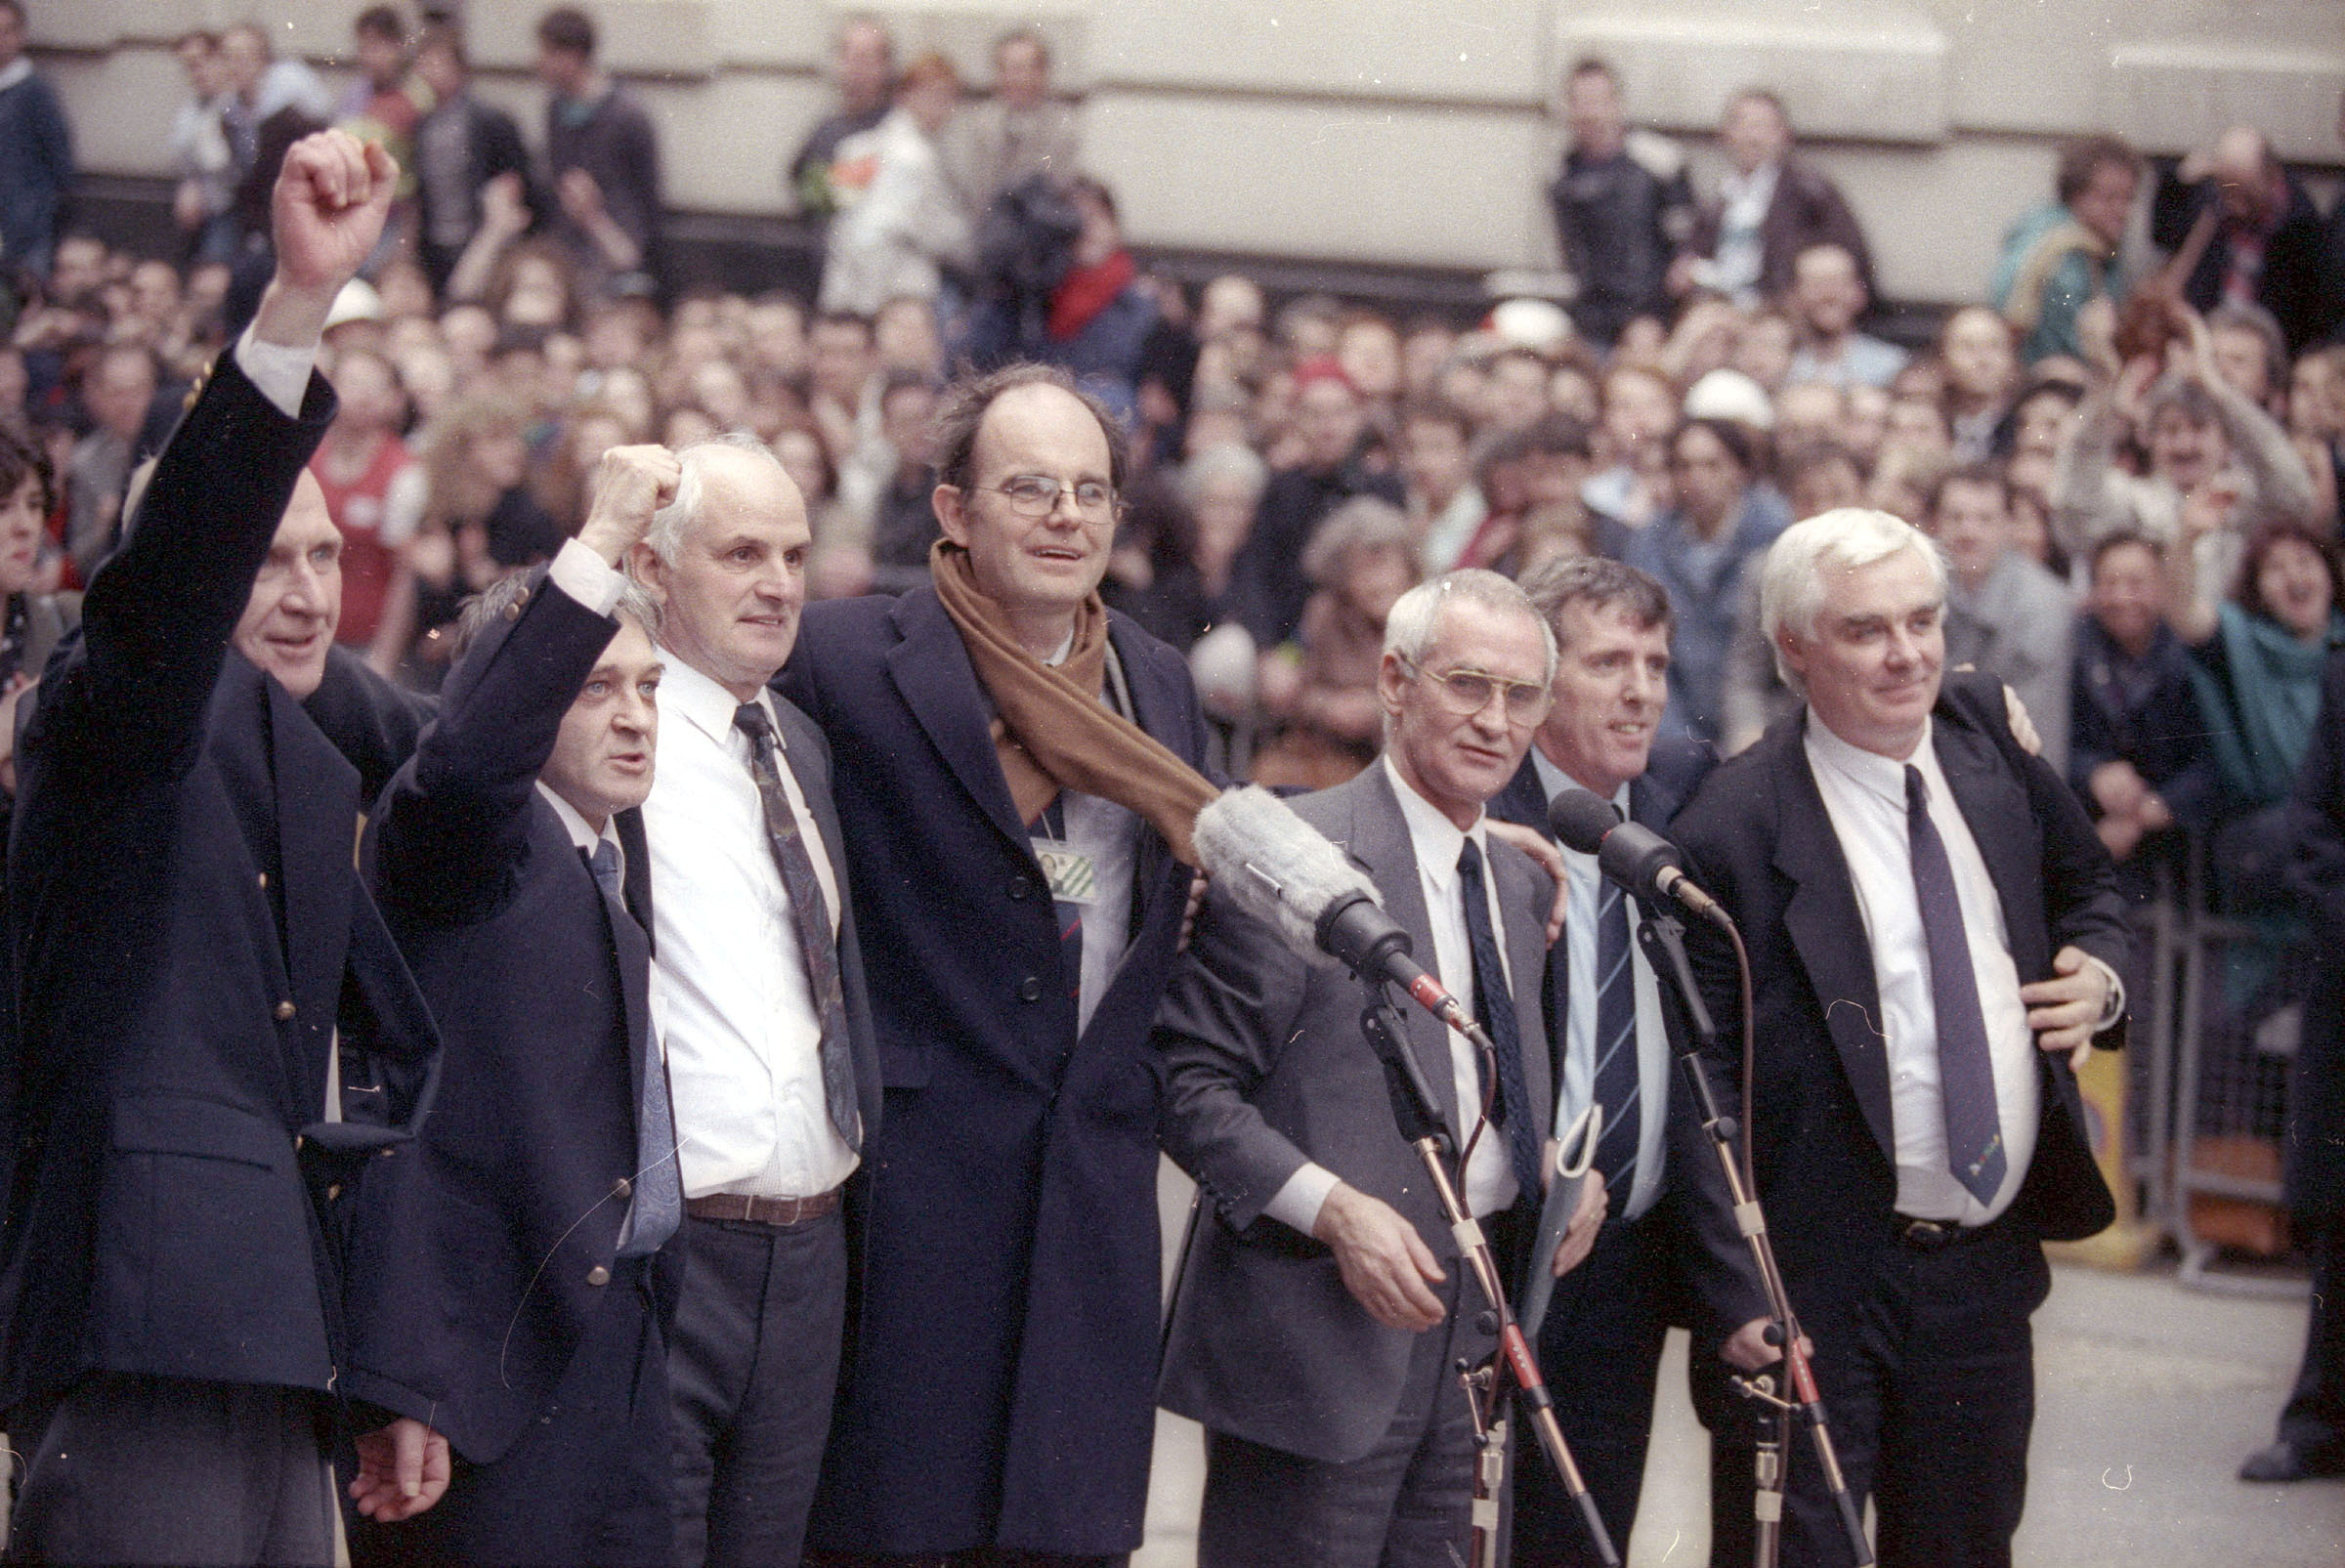 Aquitted members of the Birmingham Six, sent to prison in 1975 for the IRA's bombing of two pubs, gather ...